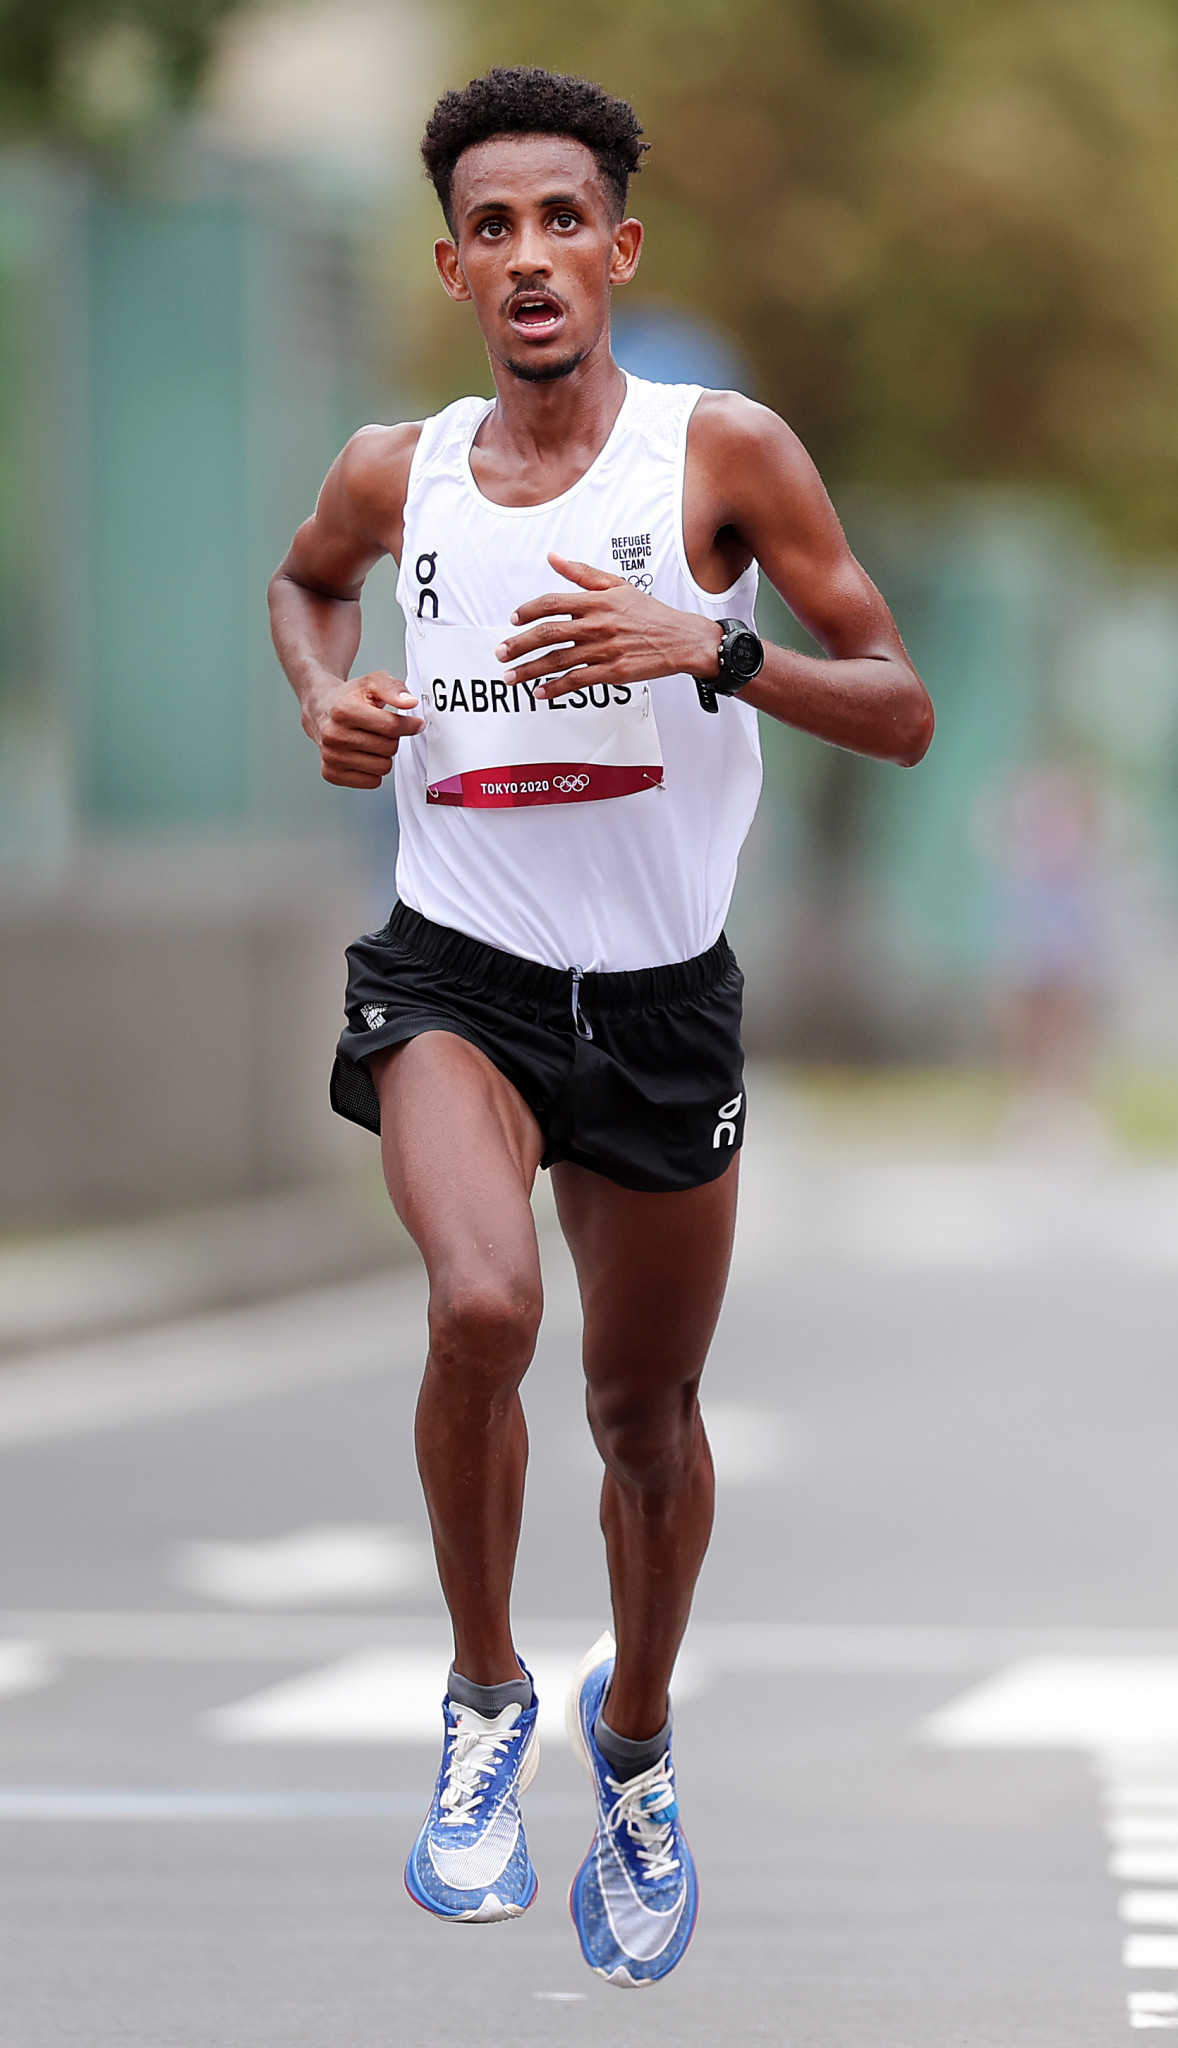 Tachlowini Gabriyesos, 16th in the Tokyo 2020 men's marathon, is among those who will benefit from the newly-announced Asics sponsorship of the World Athletics Refugee Team until 2026 ©Getty Images